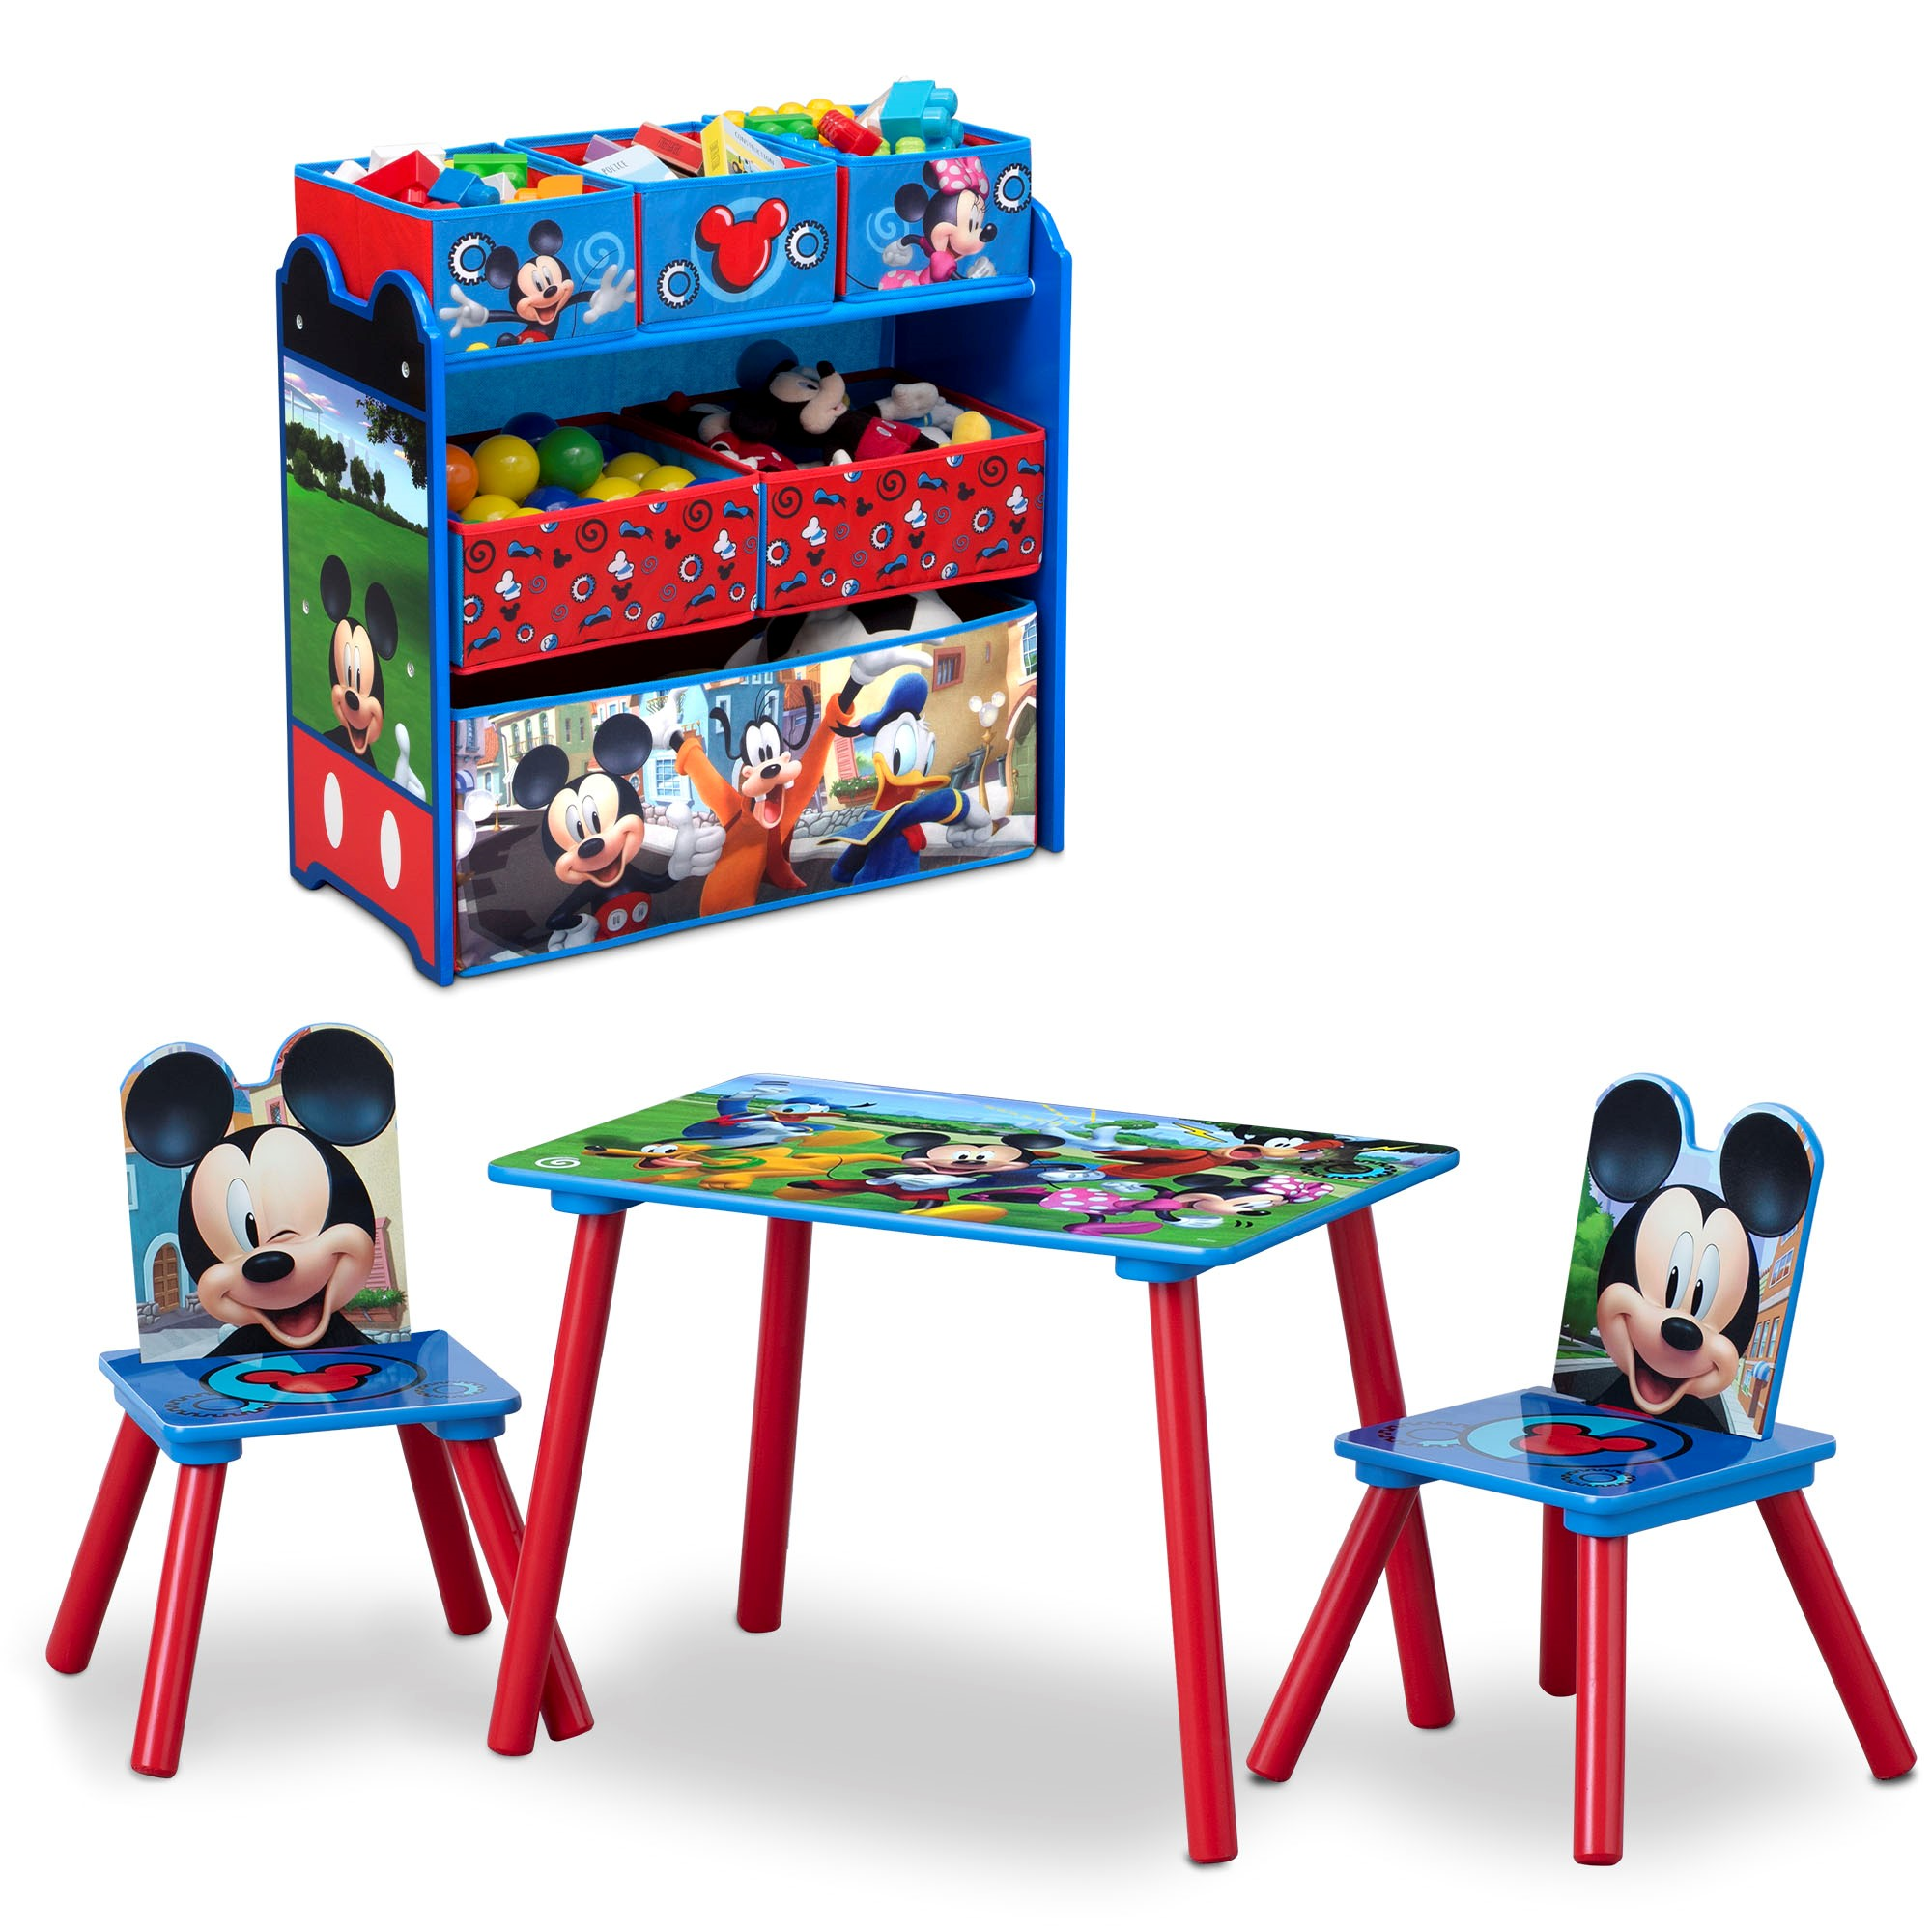 4-Pc Disney Mickey Mouse Playroom Set w/ Table, 2 Chairs and 6-Bin Toy Organizer $39.98